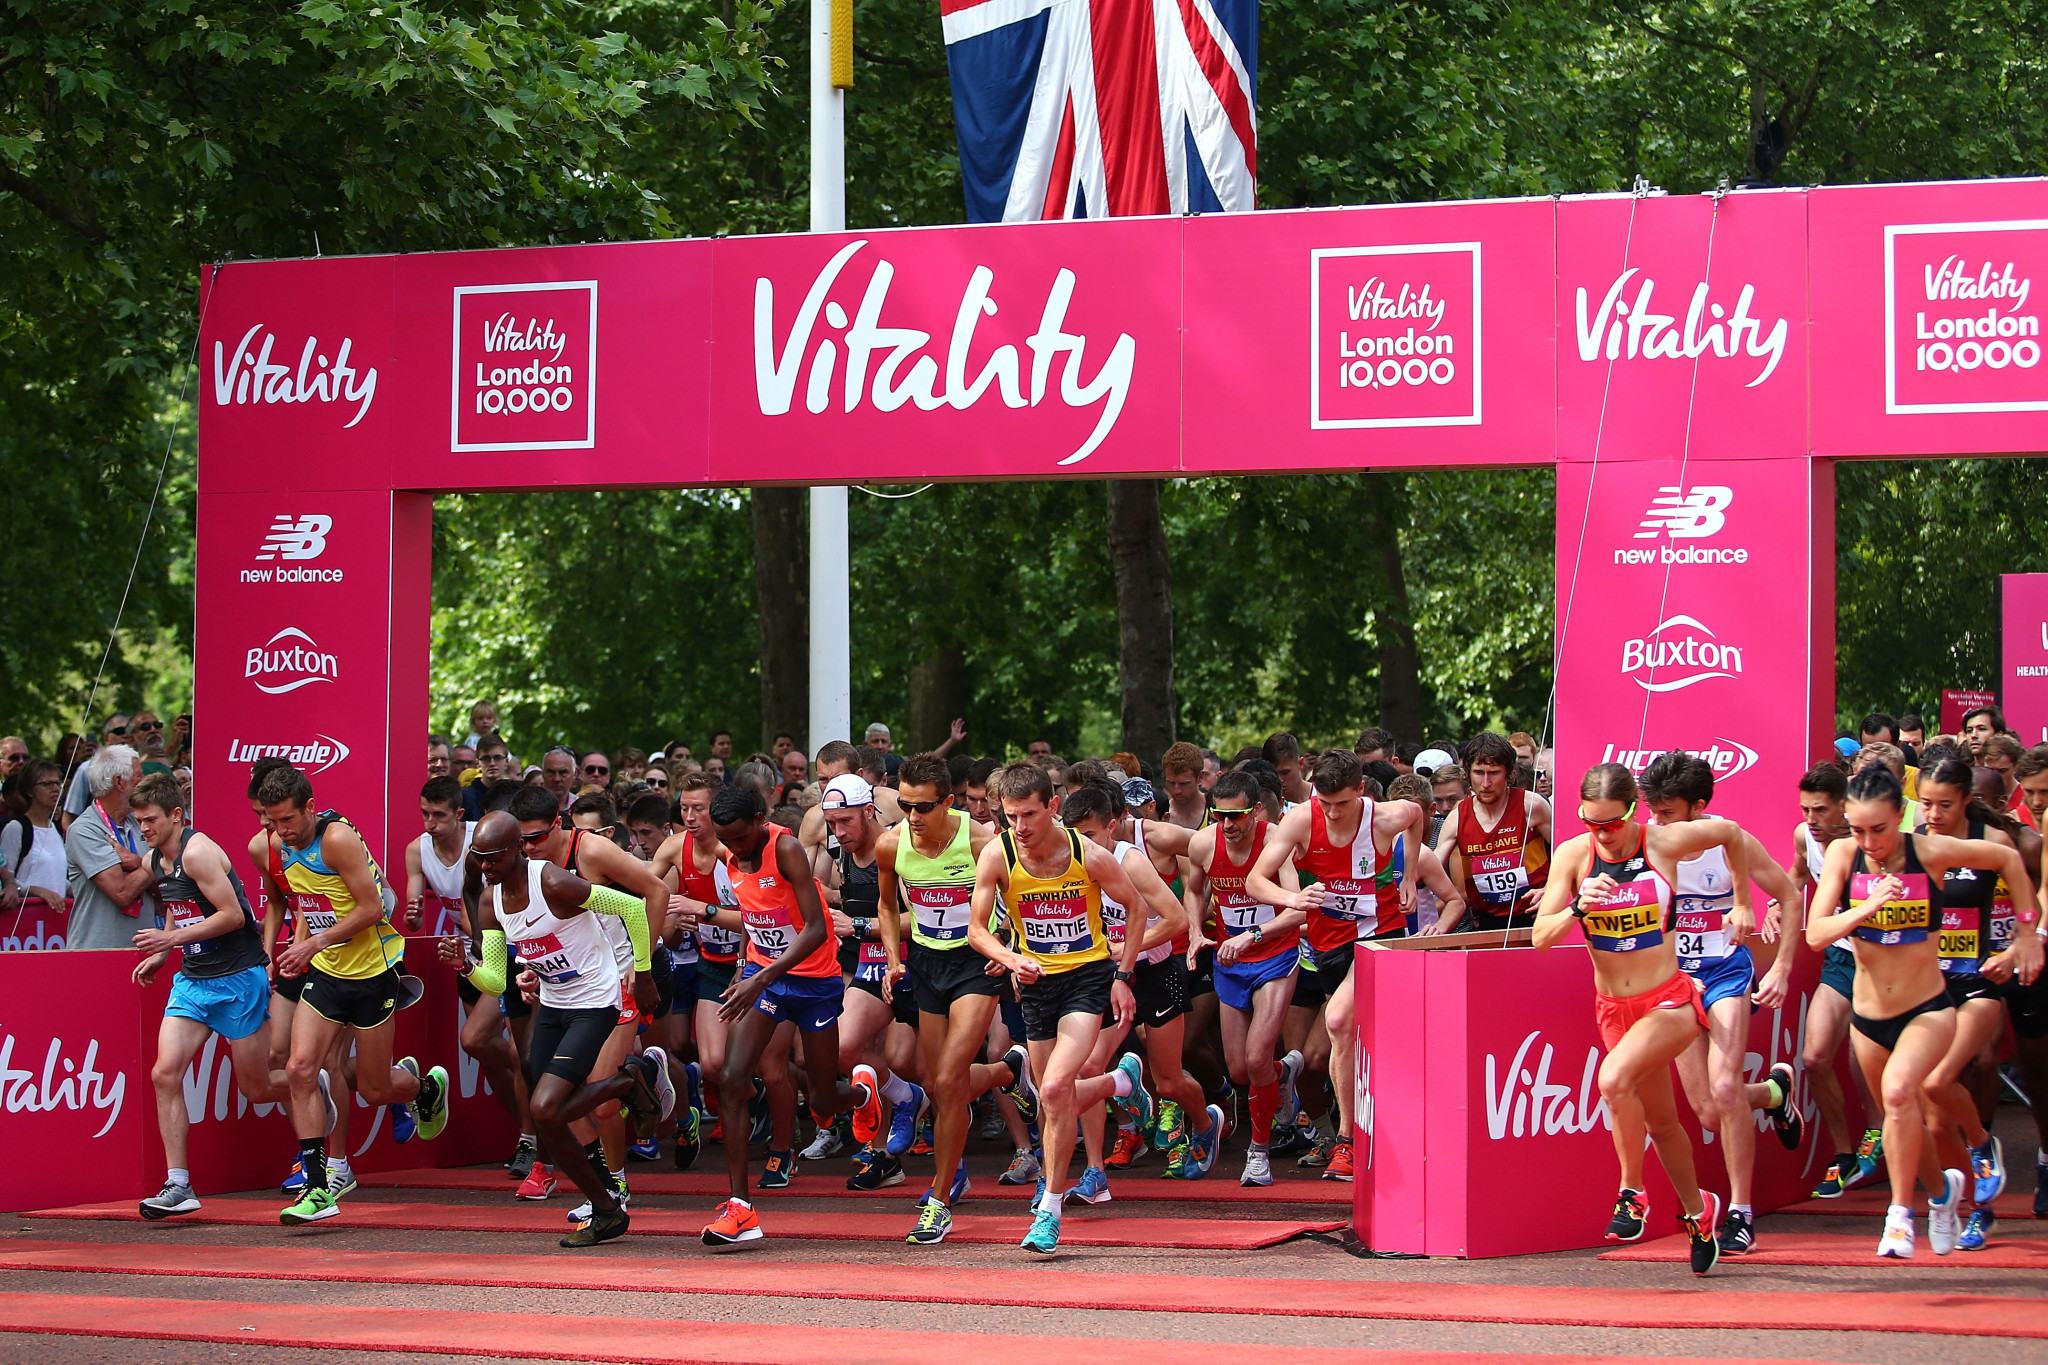 Participants encouraged to "Run for Ukraine" at Vitality London 10,000